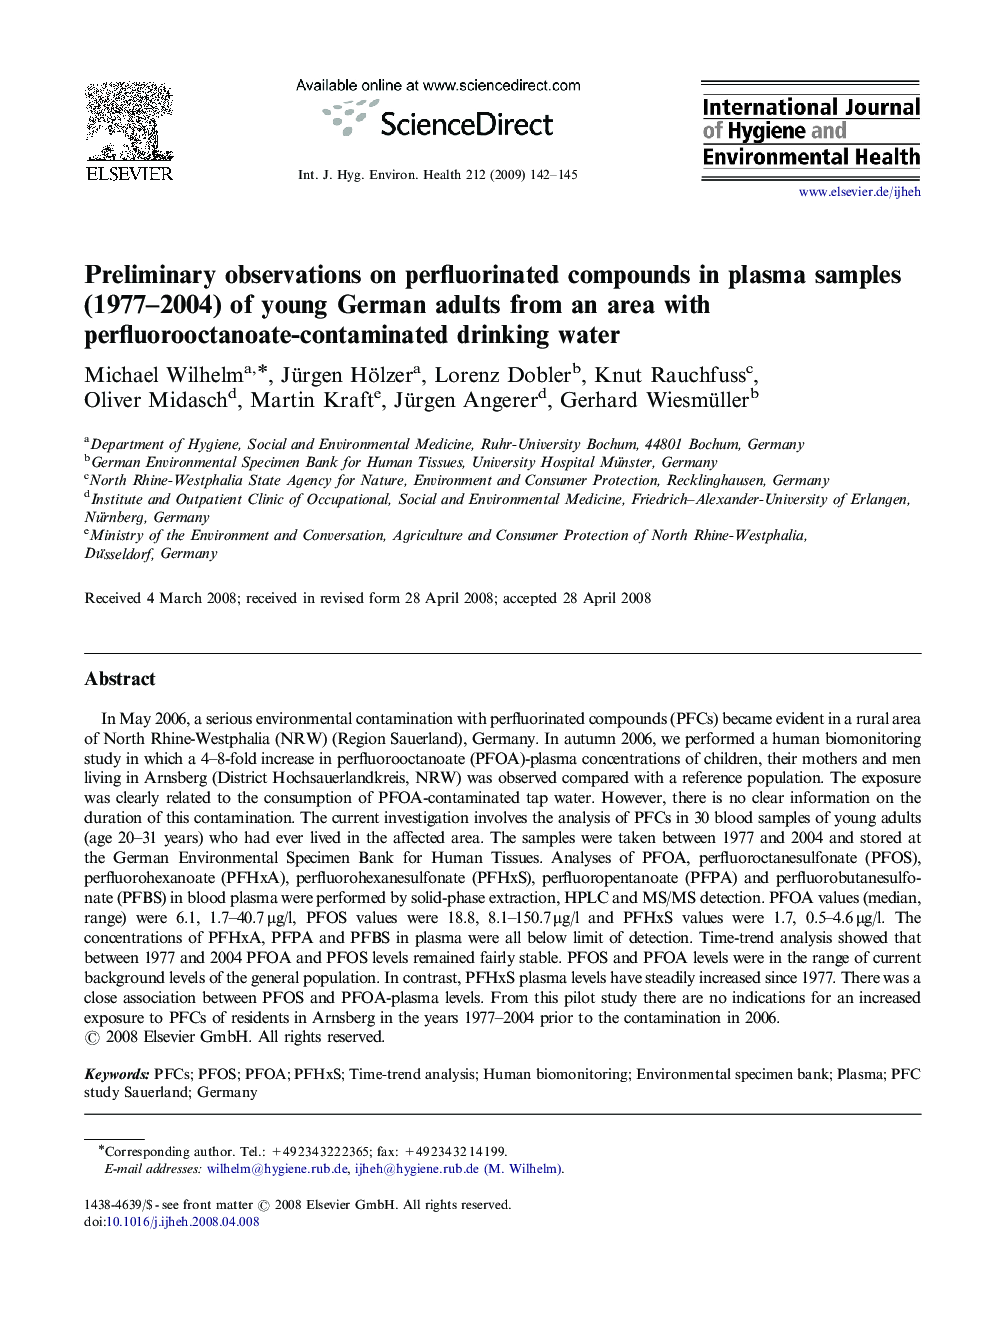 Preliminary observations on perfluorinated compounds in plasma samples (1977–2004) of young German adults from an area with perfluorooctanoate-contaminated drinking water